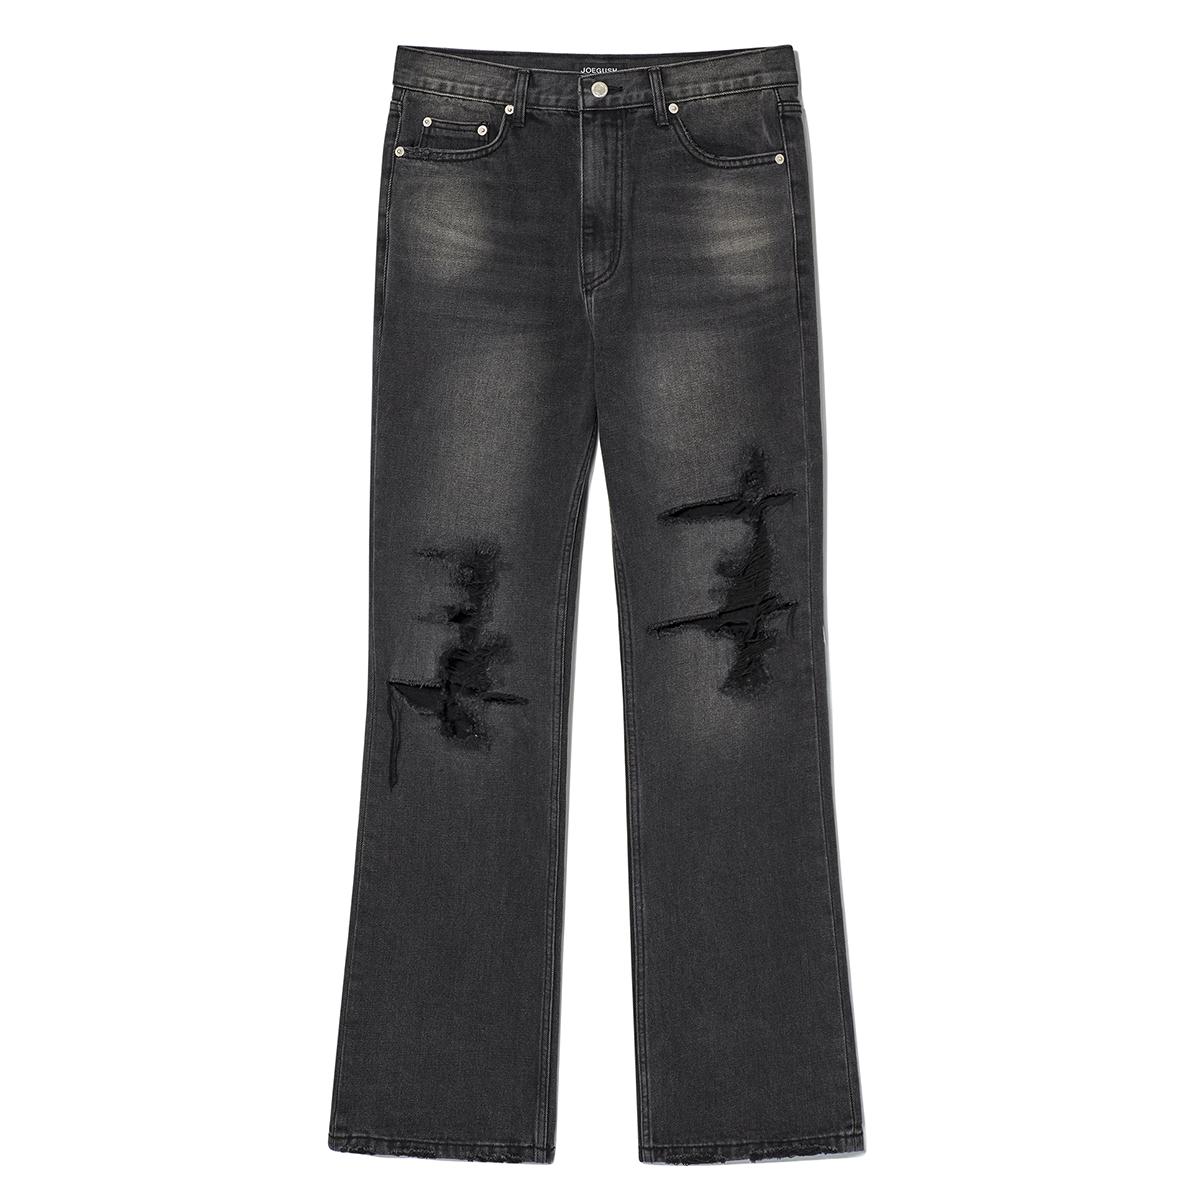 2nd Type Jeans (Black)